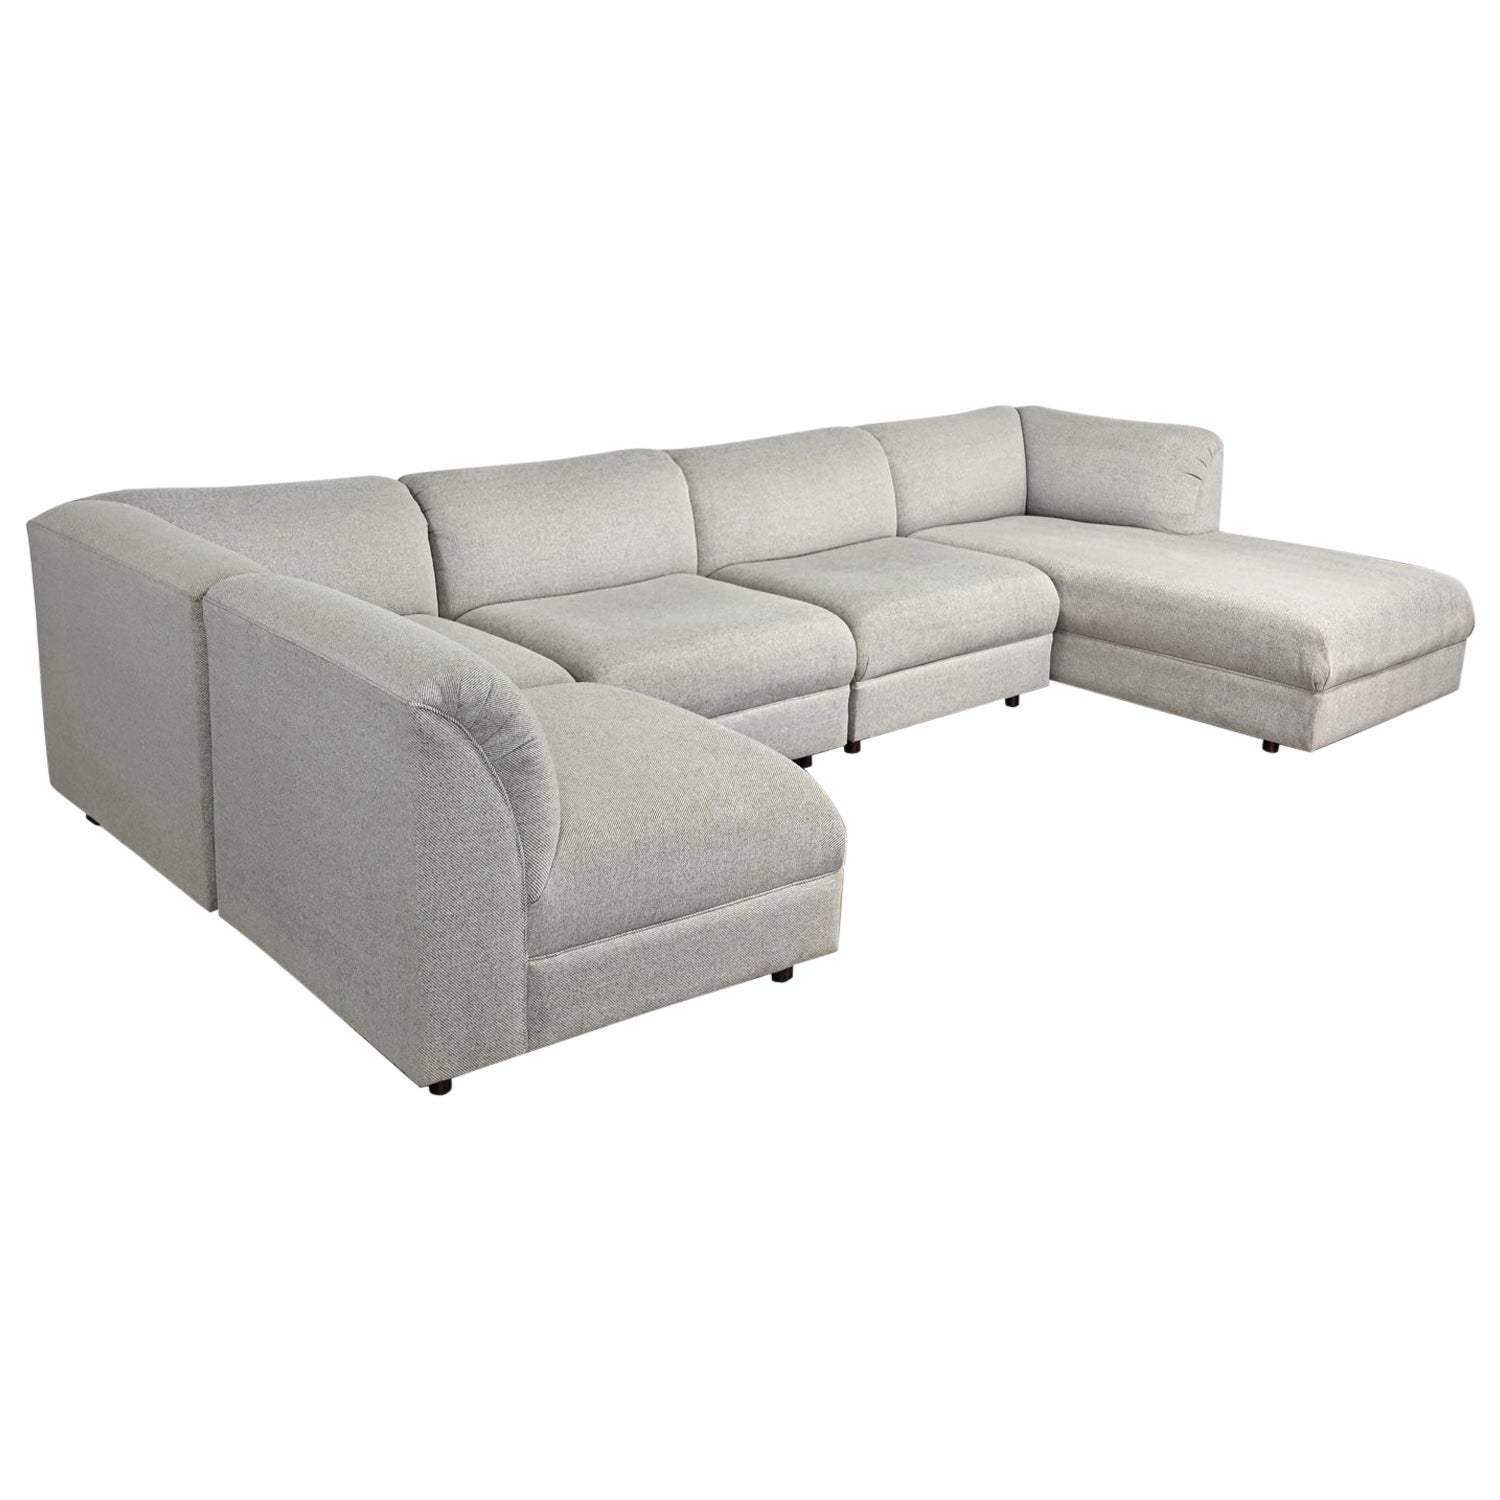 Late 20th Century Modern Modular Sectional Sofa 5 Pieces with Chaise Gray Tweed  For Sale